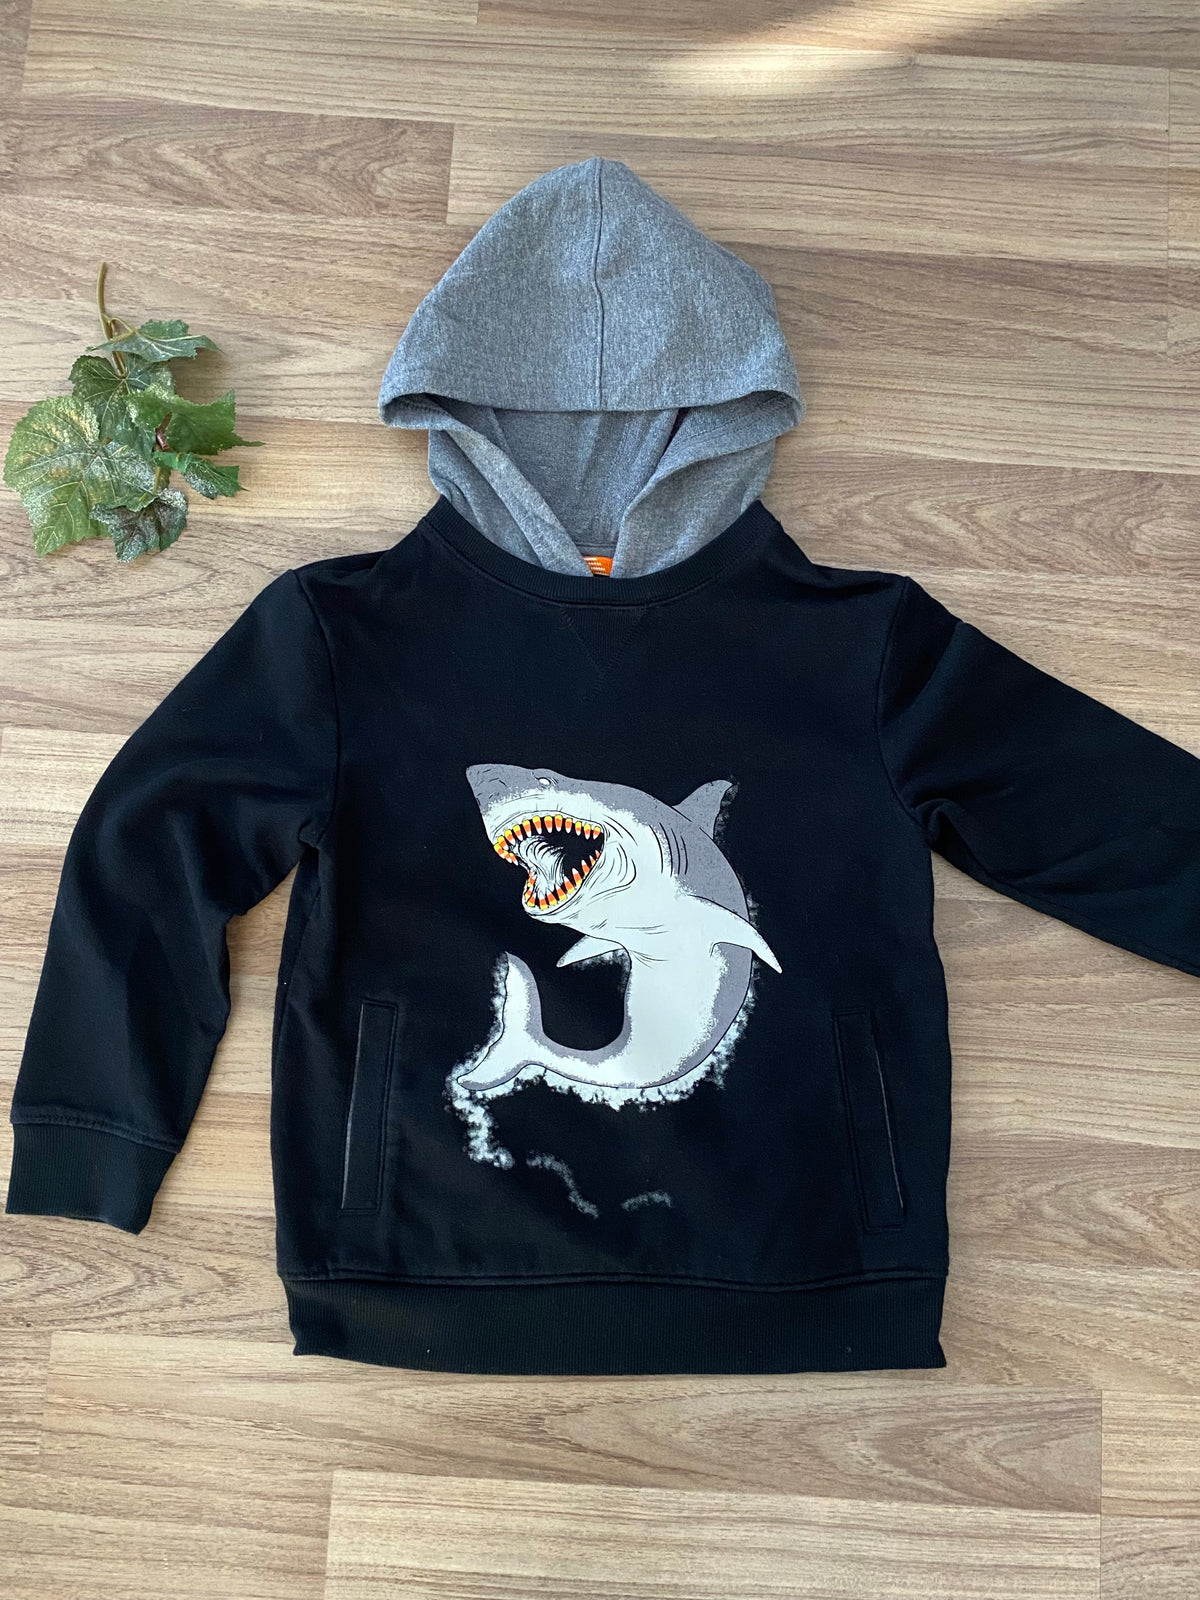 Pullover Hooded Sweater (Boys Size 4-5)